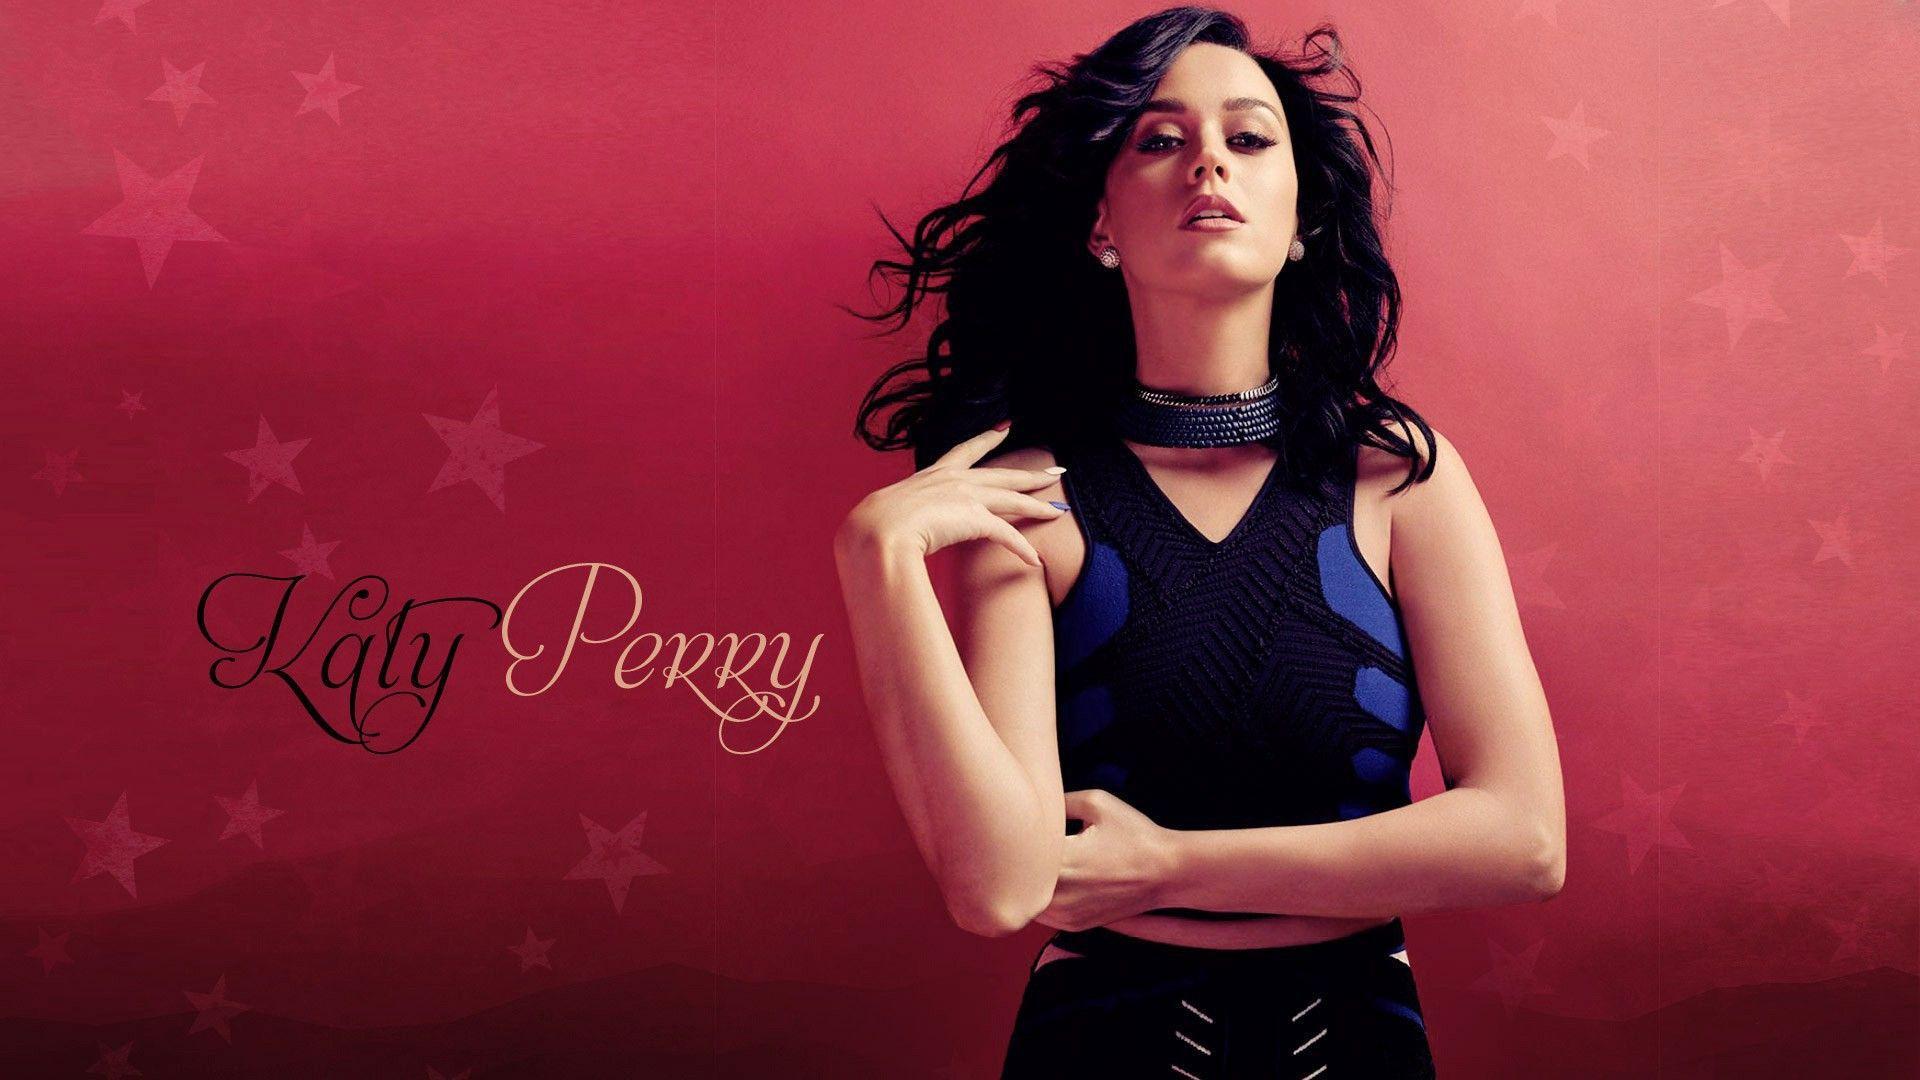 Katy Perry Gorgeous Image HD Wallpaper